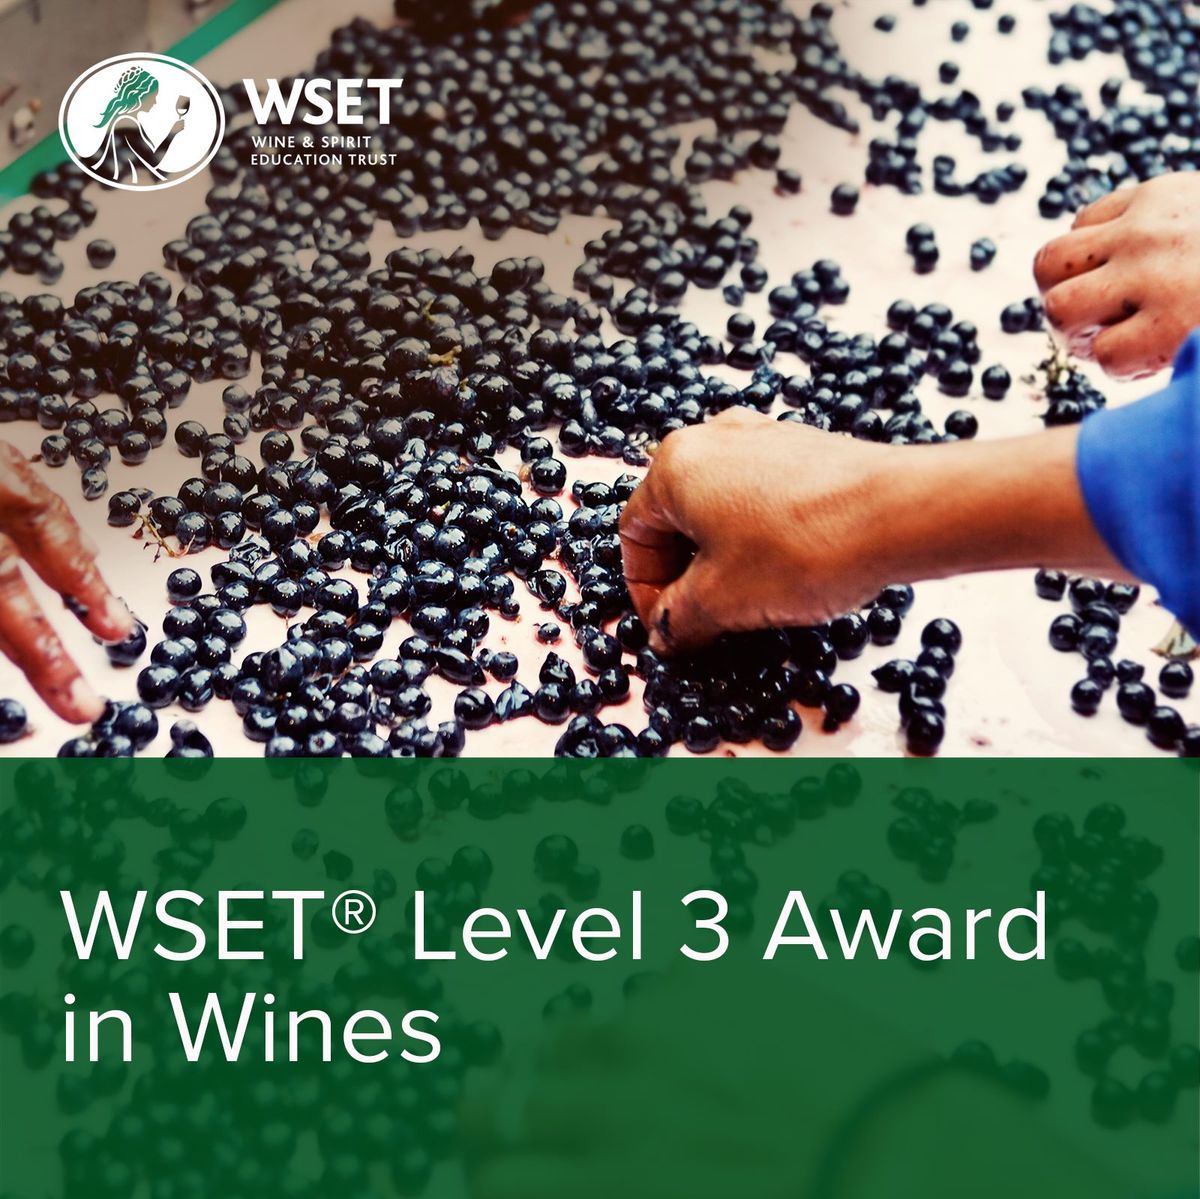 WSET Level 3 Award in Wines (English) - 6 days-course